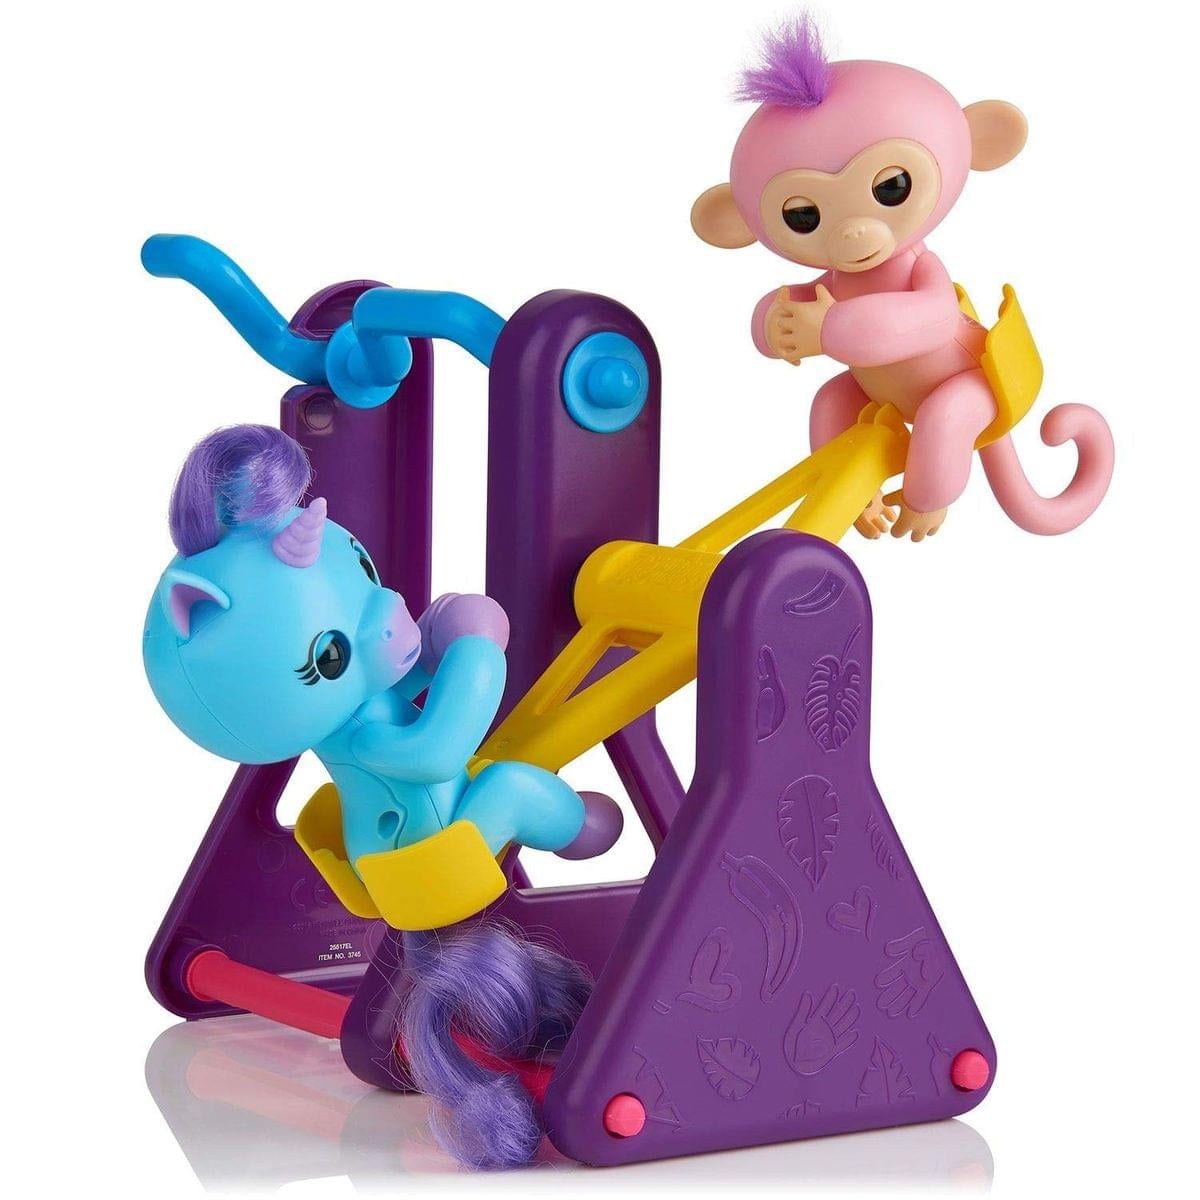 Authentic Fingerlings Playset Same Day Ship Complete Set 8 WooWee Fingerling 